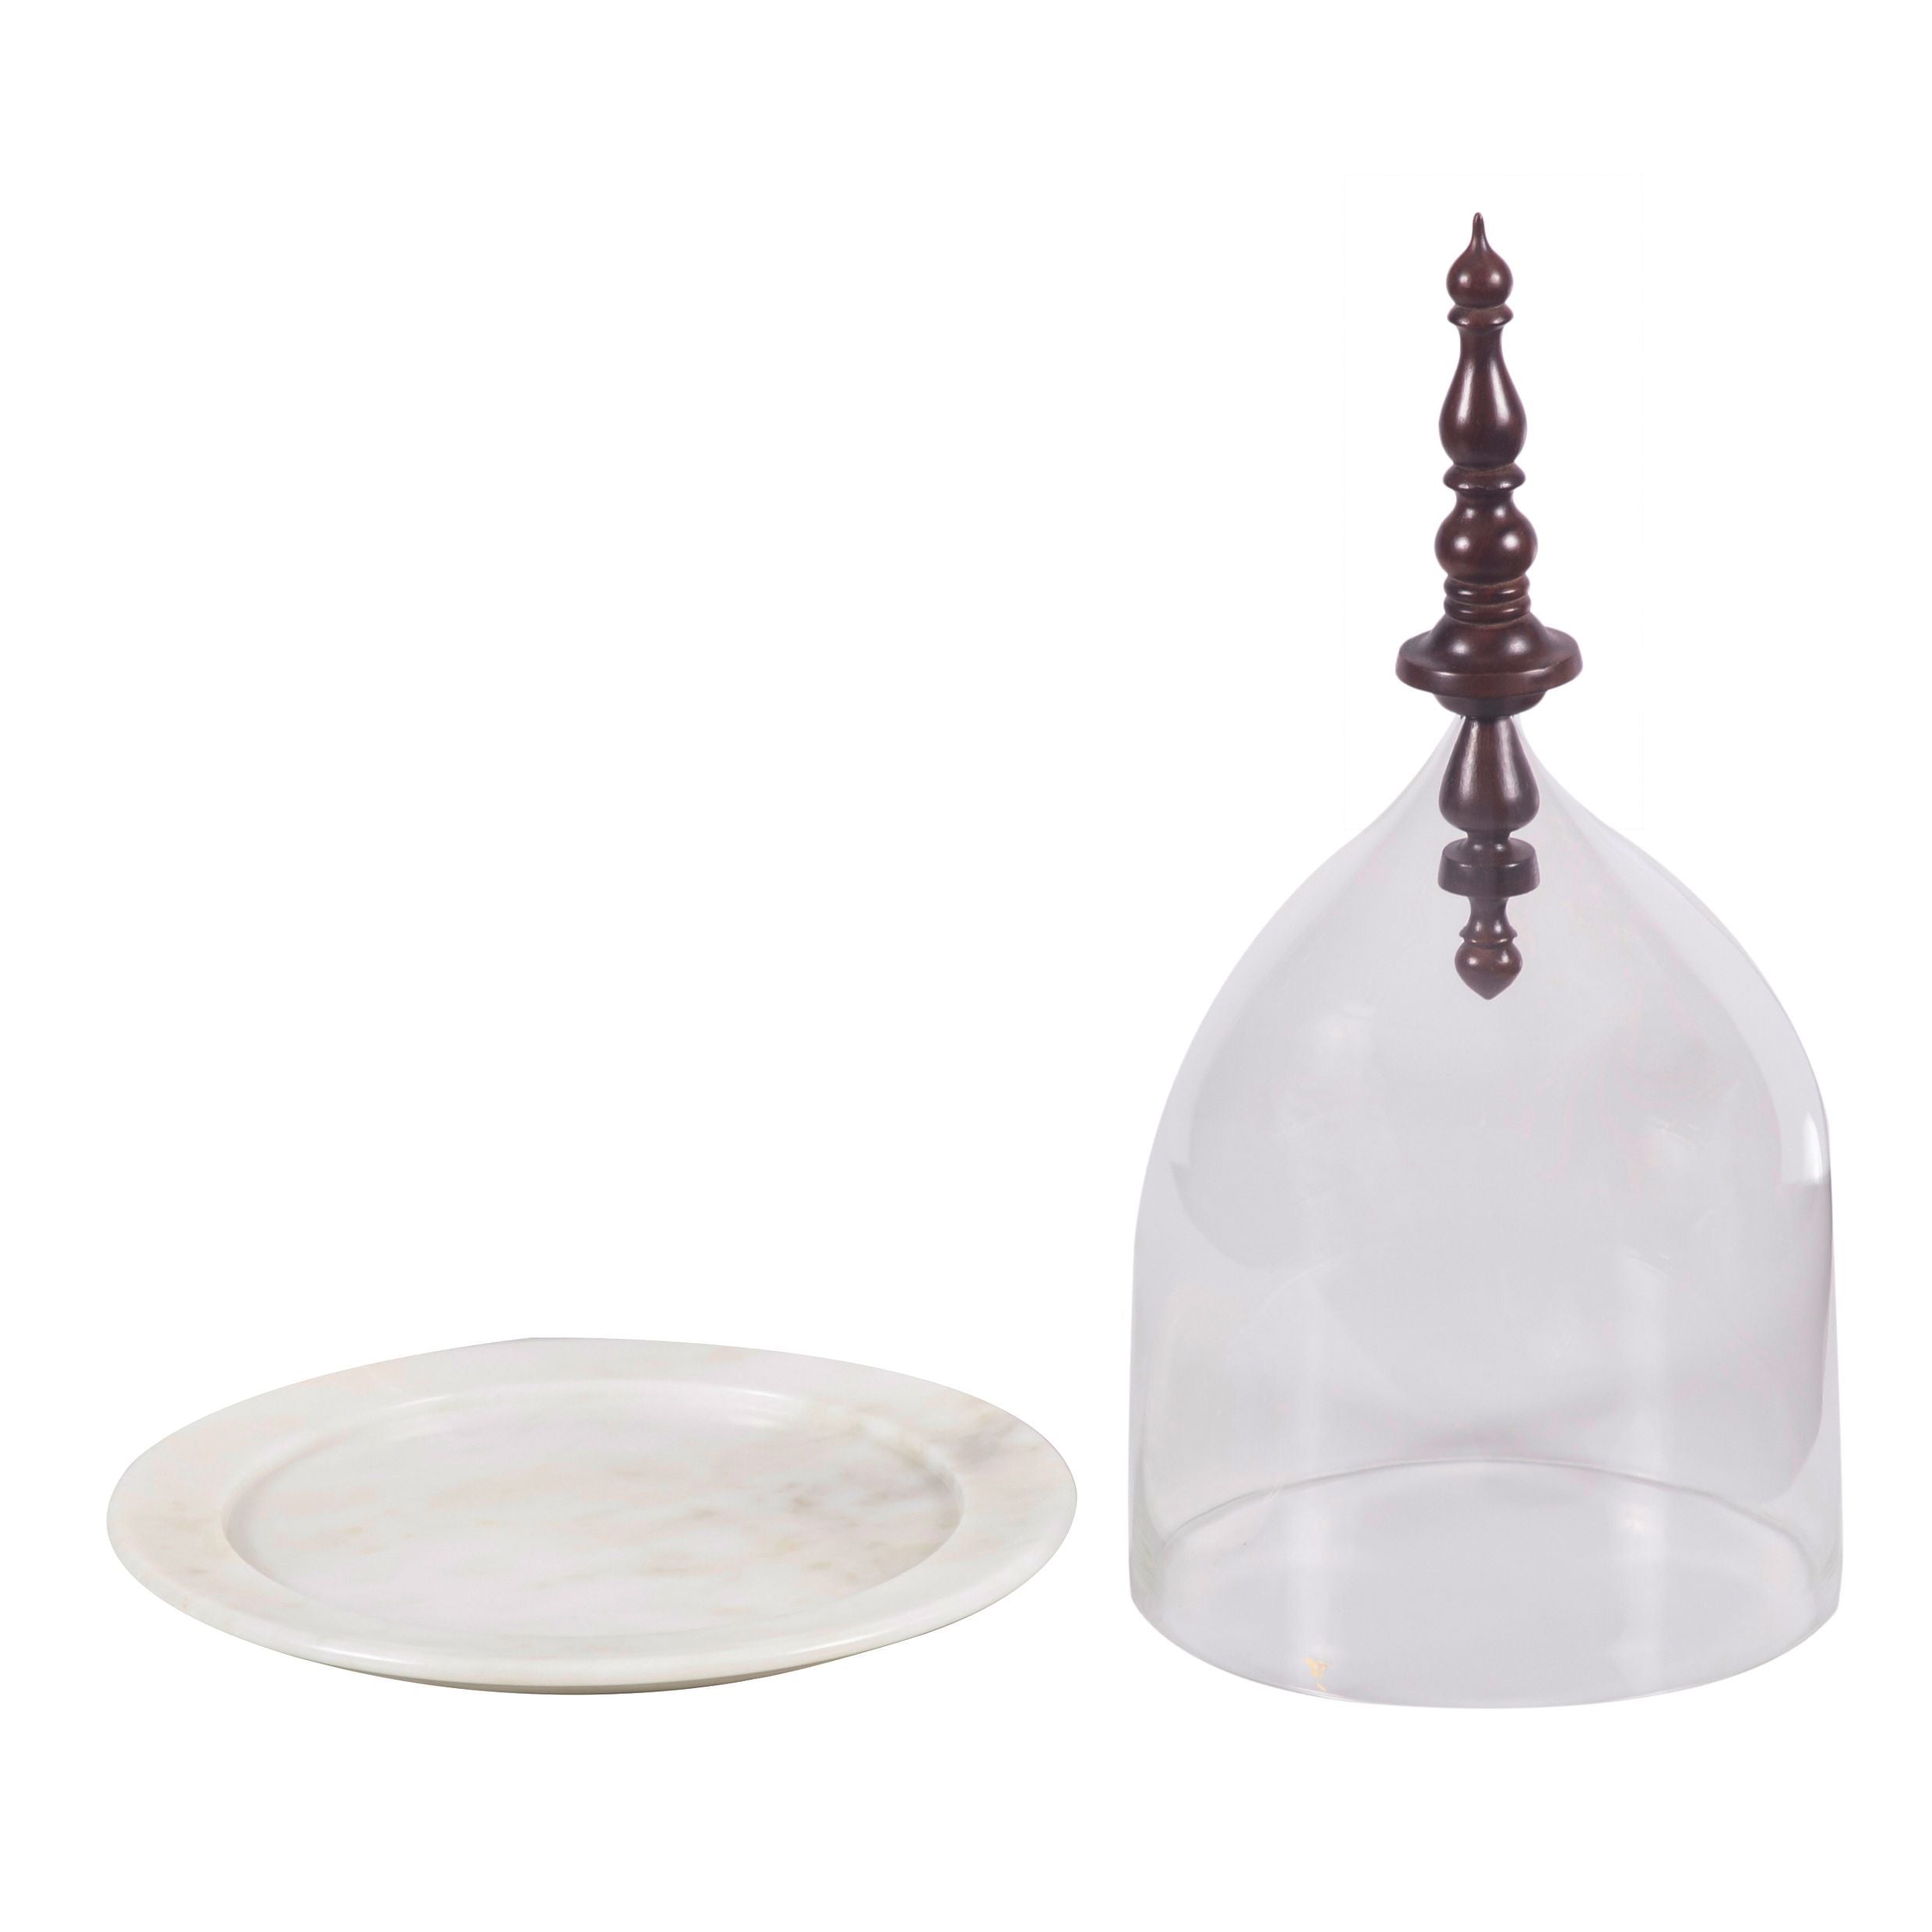 Closh  Home Objects , Dining , Serving, glass sheesham wood Table top, glass transparent closh